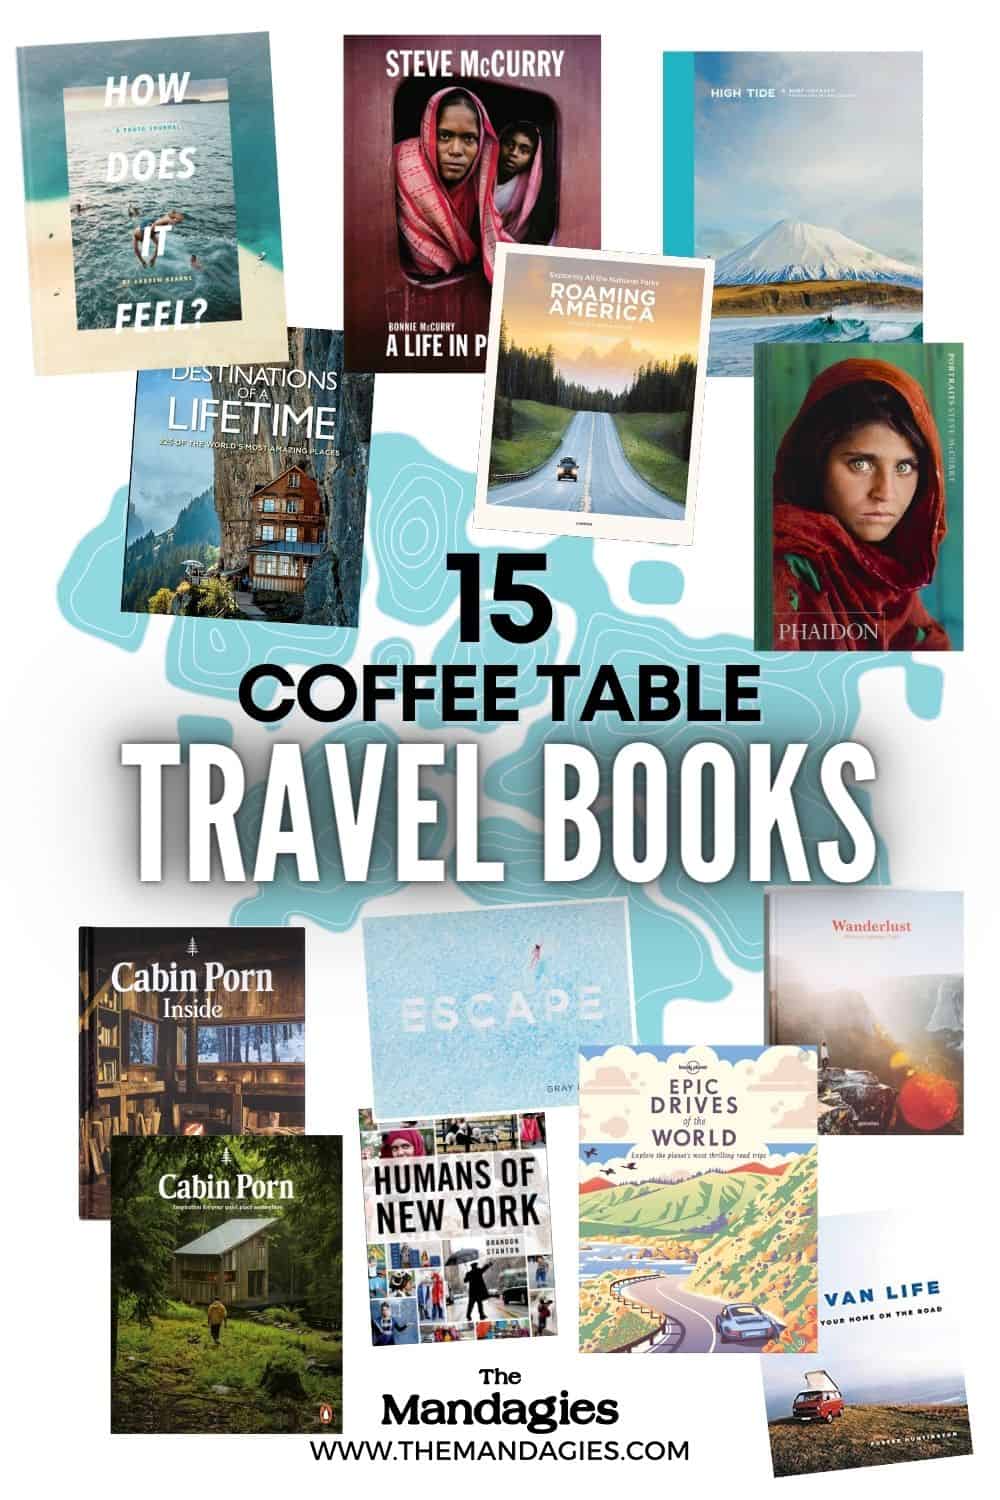 One of the coolest gifts for travelers had got to be coffee table books! They are beautiful, informational, and teeming with inspiration for your next adventure! Browse the best coffee table travel books, from beaches to mountains, best hikes, and road trip routes! #roadtrips #wintertravel #winter #giftguide #travelgiftguide #christmas #xmas #christmasgifts #gifting #giftideas #travelbooks #books #coffeetablebooks